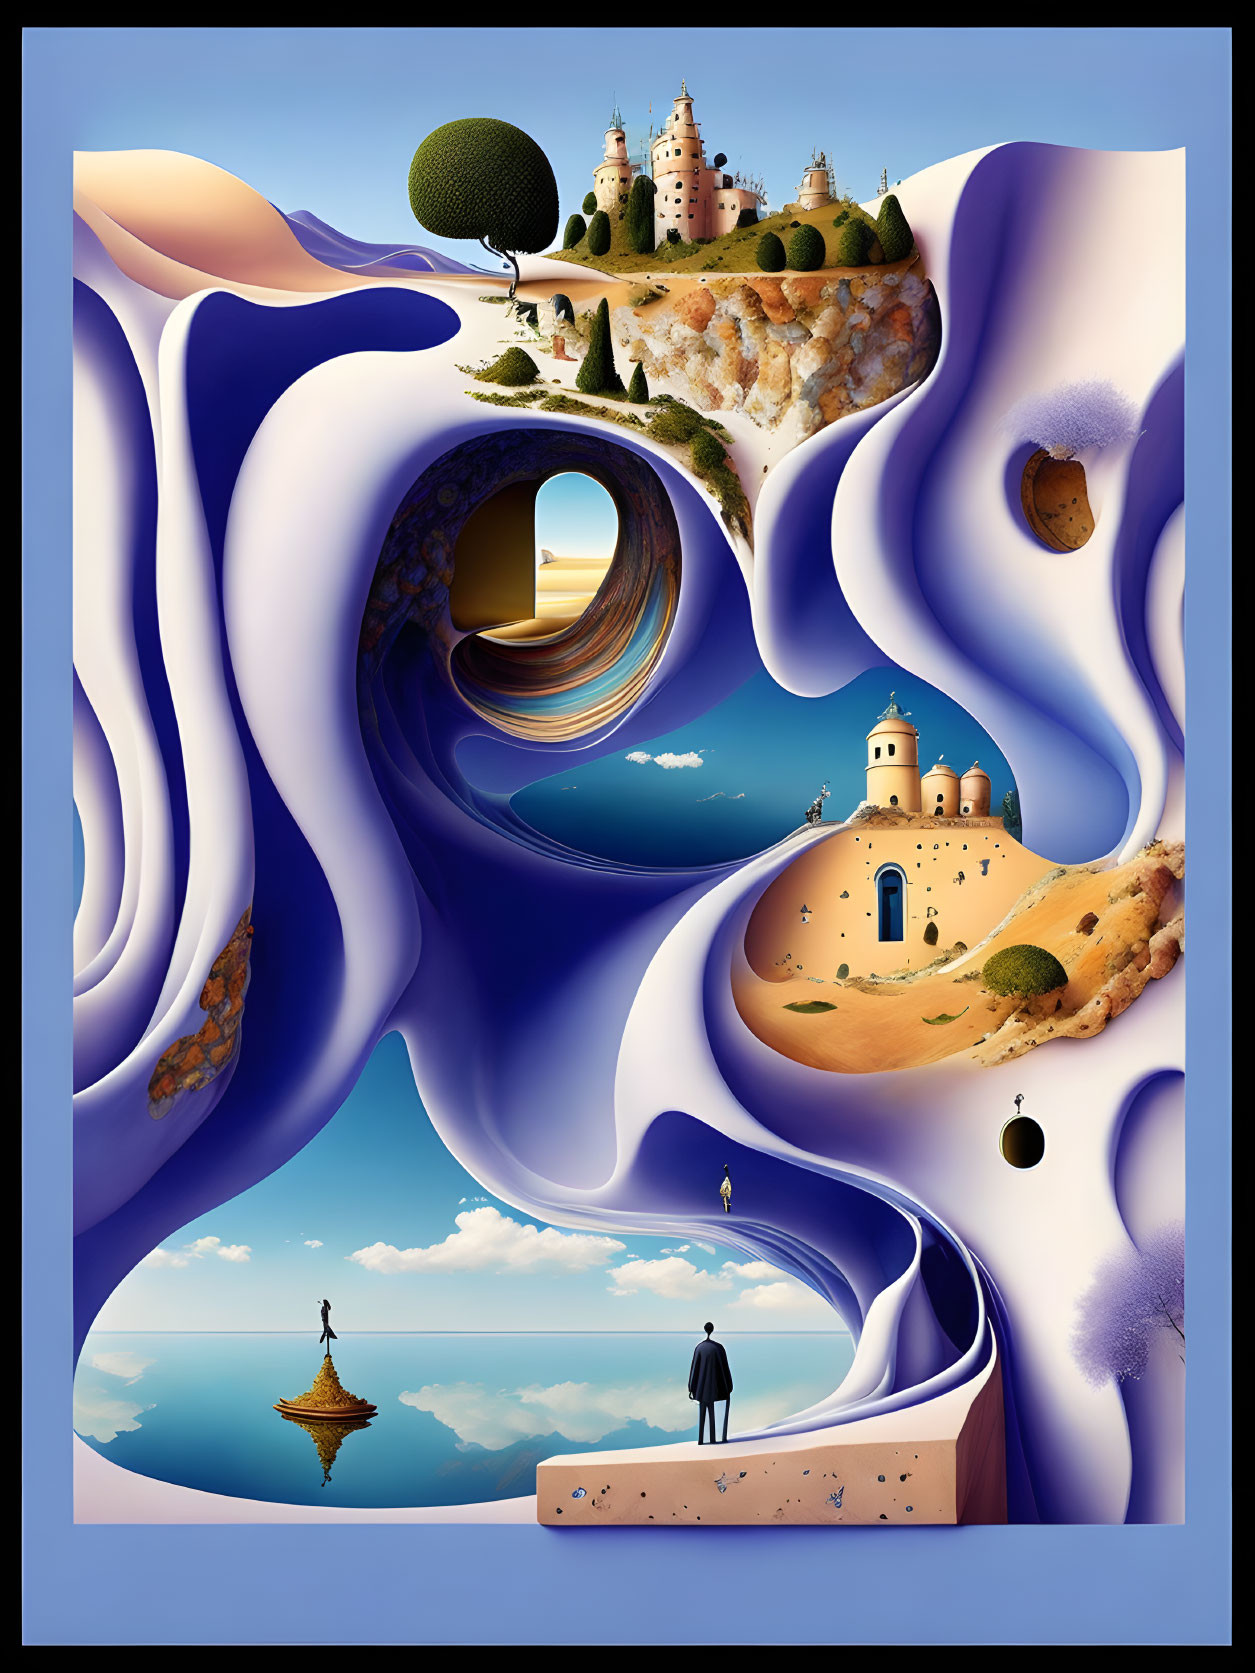 Surrealistic Landscape with Flowing Wave-like Structures in Vibrant Blues and Earth Tones